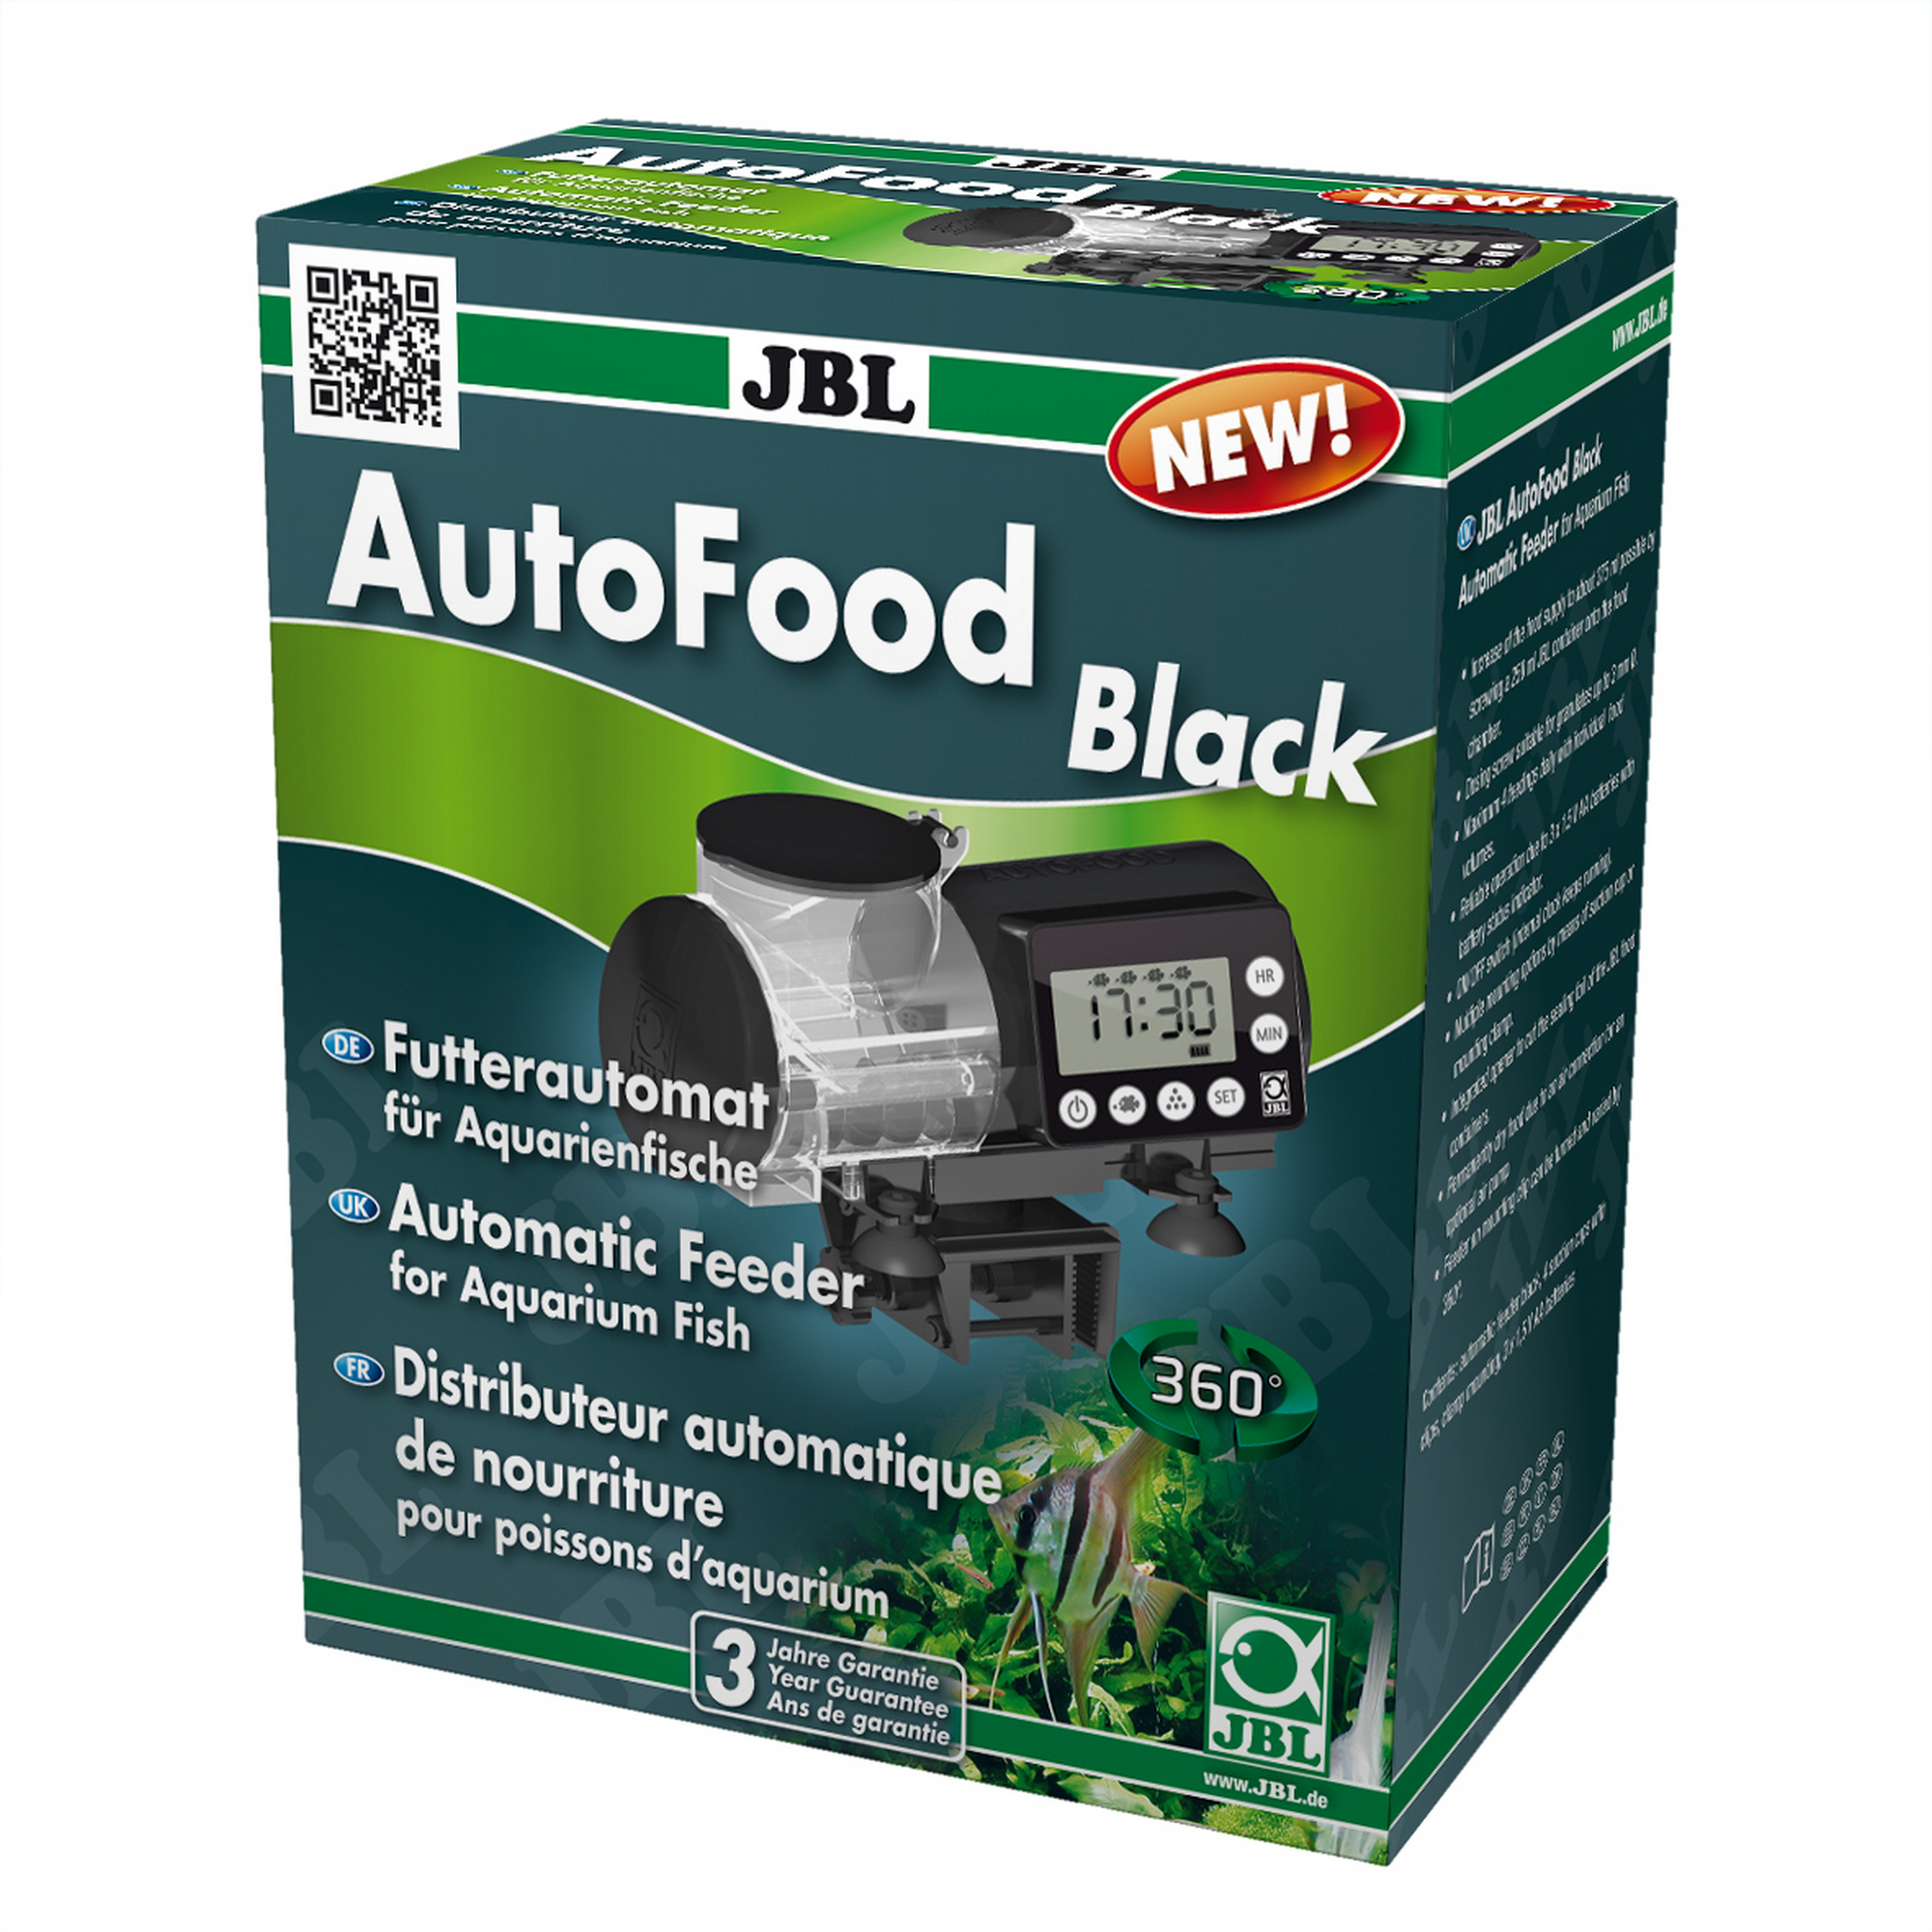 AutoFood Black Futterautomat + product picture